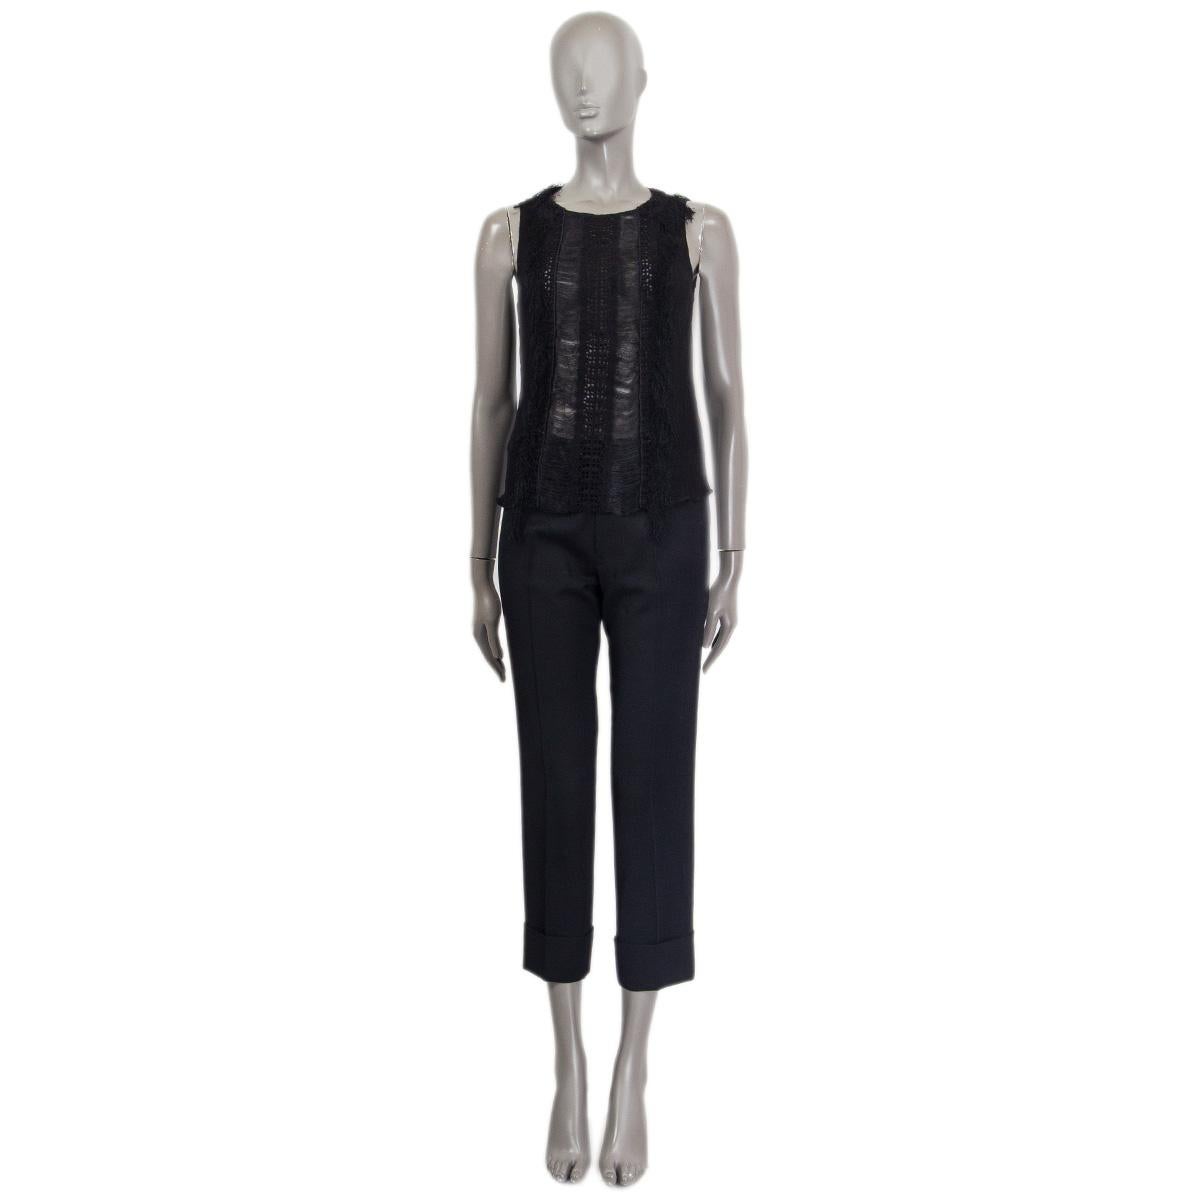 100% authentic Alberta Ferretti sleevless sheer fringed top in black silk (100%), rayon (45%), cotton (43%) and polyester (12%) with crochet detail in the middle. Keyhole and button closure on the back. Has been worn and is in excellent condition.